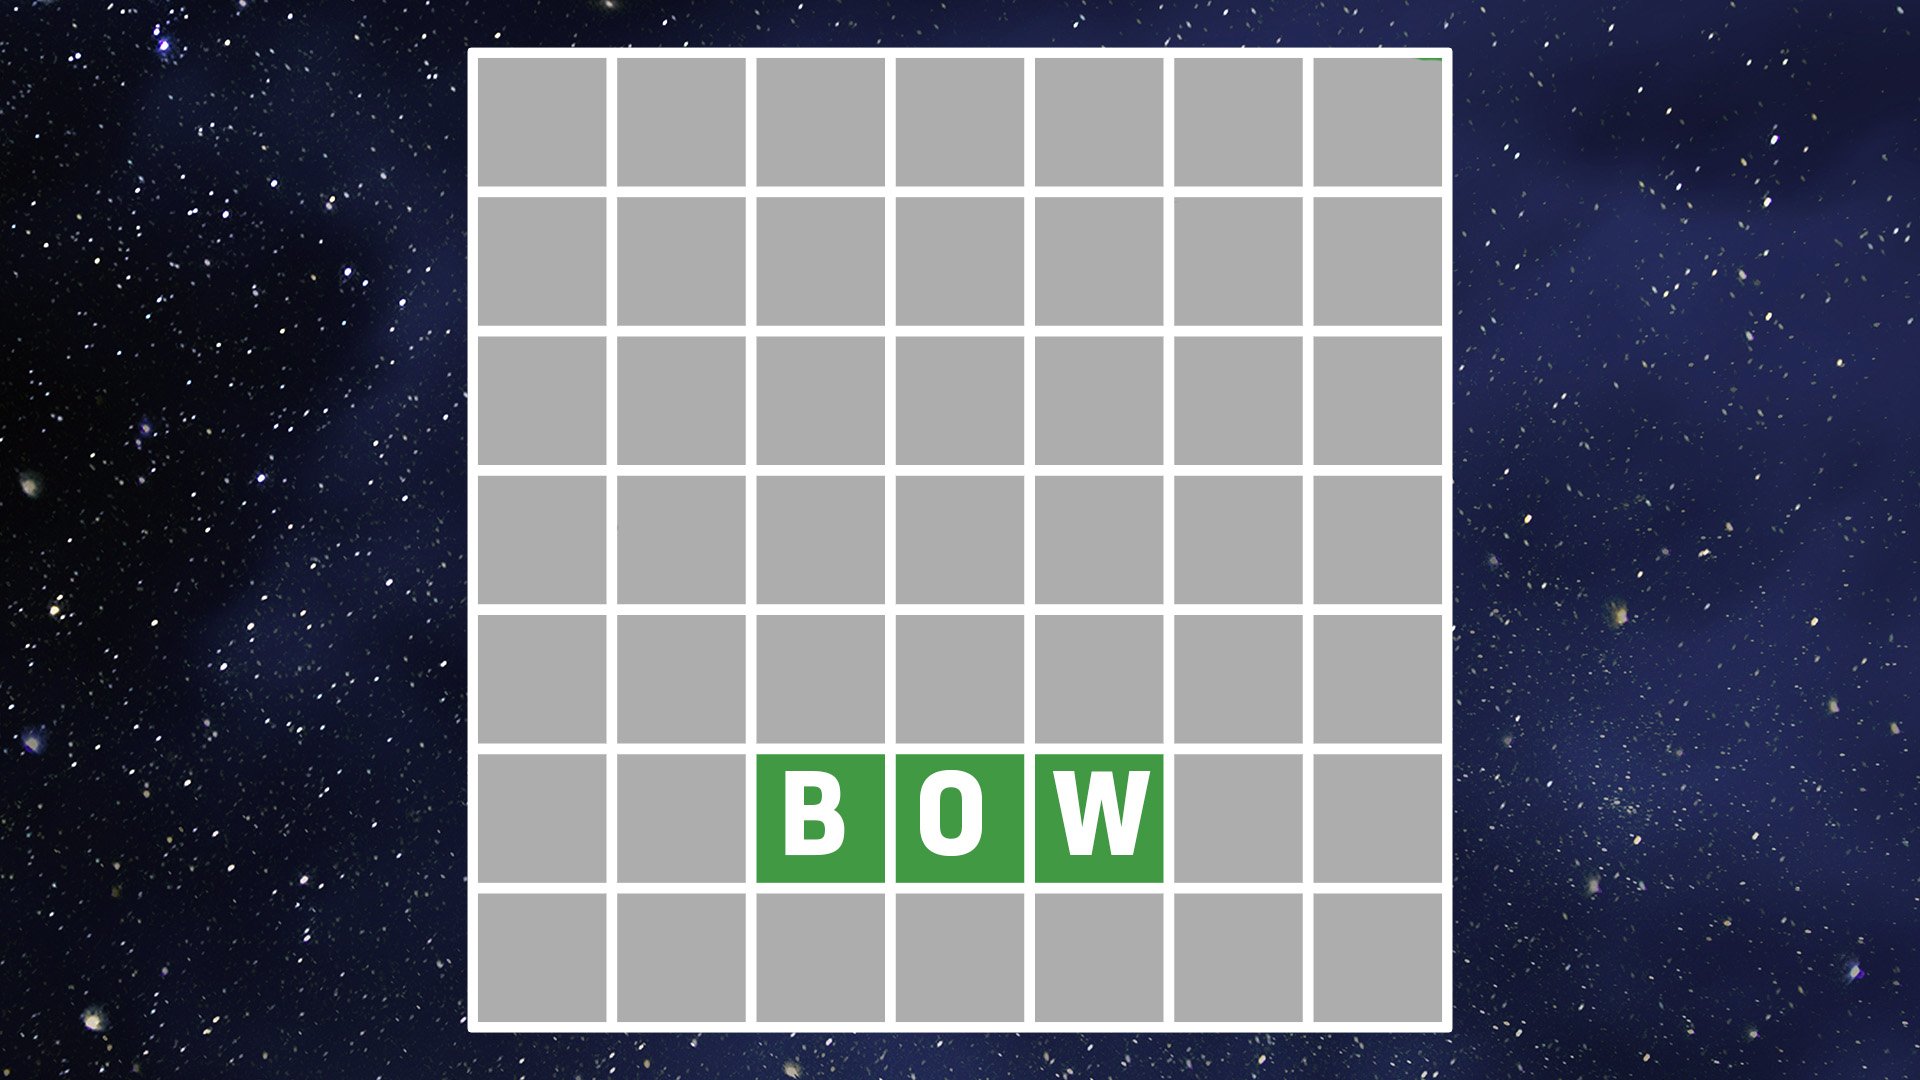 Wordle grid with the word BOW to start you off